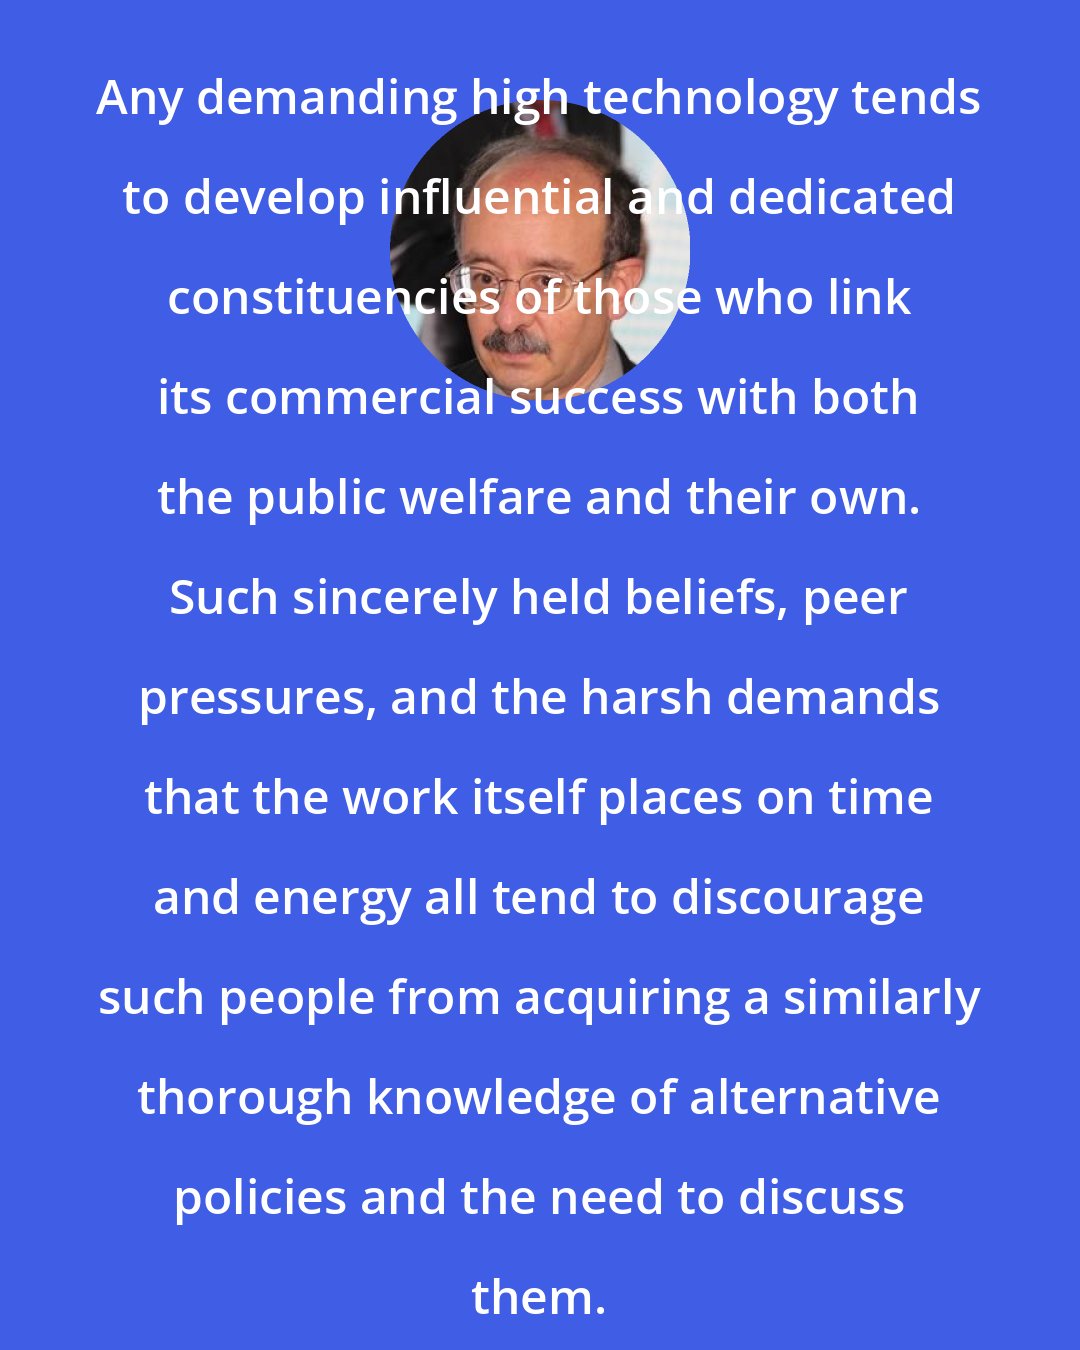 Amory Lovins: Any demanding high technology tends to develop influential and dedicated constituencies of those who link its commercial success with both the public welfare and their own. Such sincerely held beliefs, peer pressures, and the harsh demands that the work itself places on time and energy all tend to discourage such people from acquiring a similarly thorough knowledge of alternative policies and the need to discuss them.